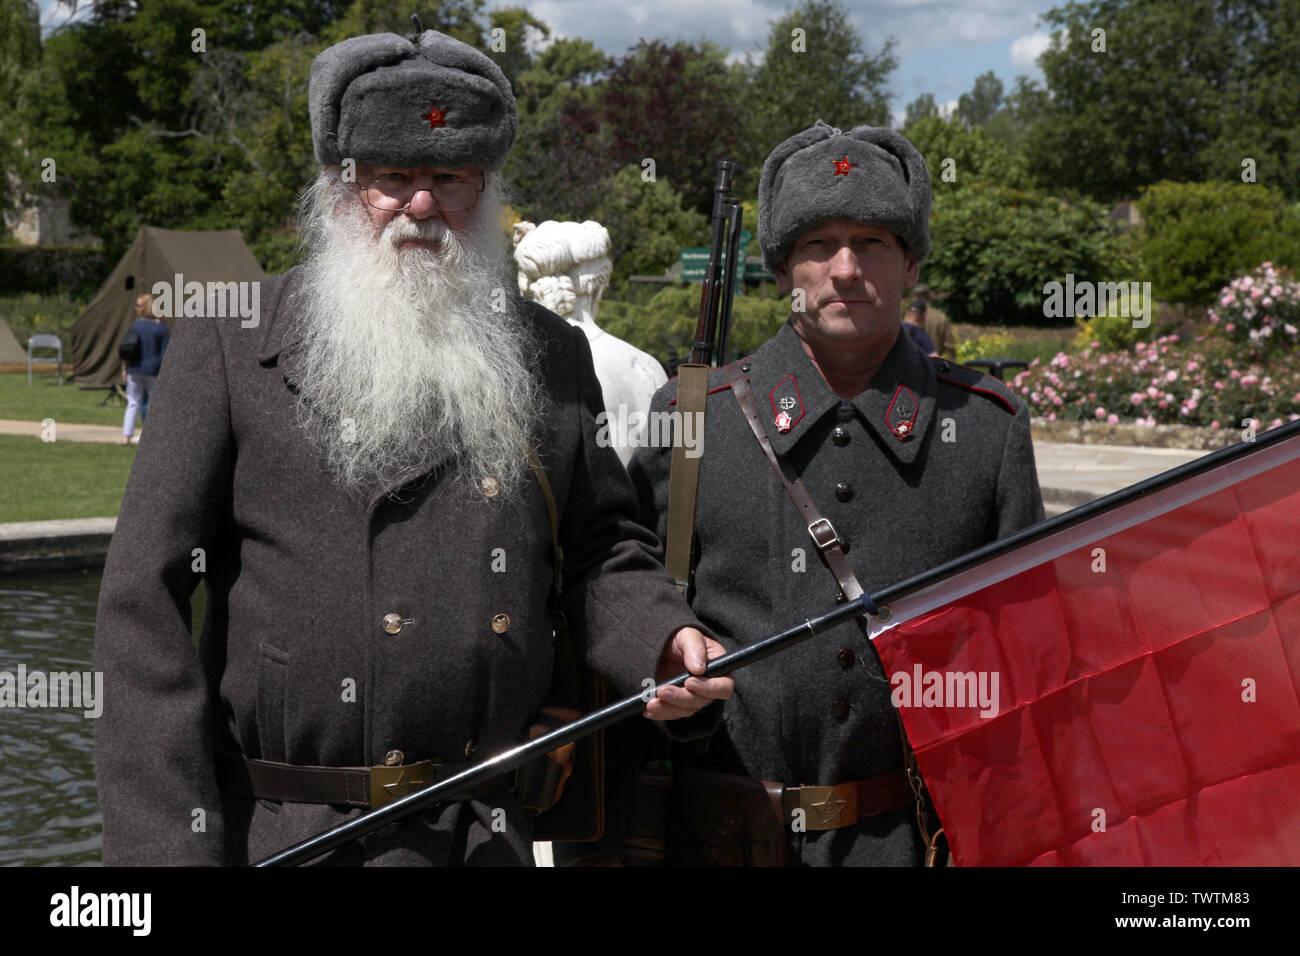 Edenbridge, Kent, UK - Two Men, A bearded Partisan and a Russian soldier dressed up re-enactment for the Home Front Festival 2019 Stock Photo